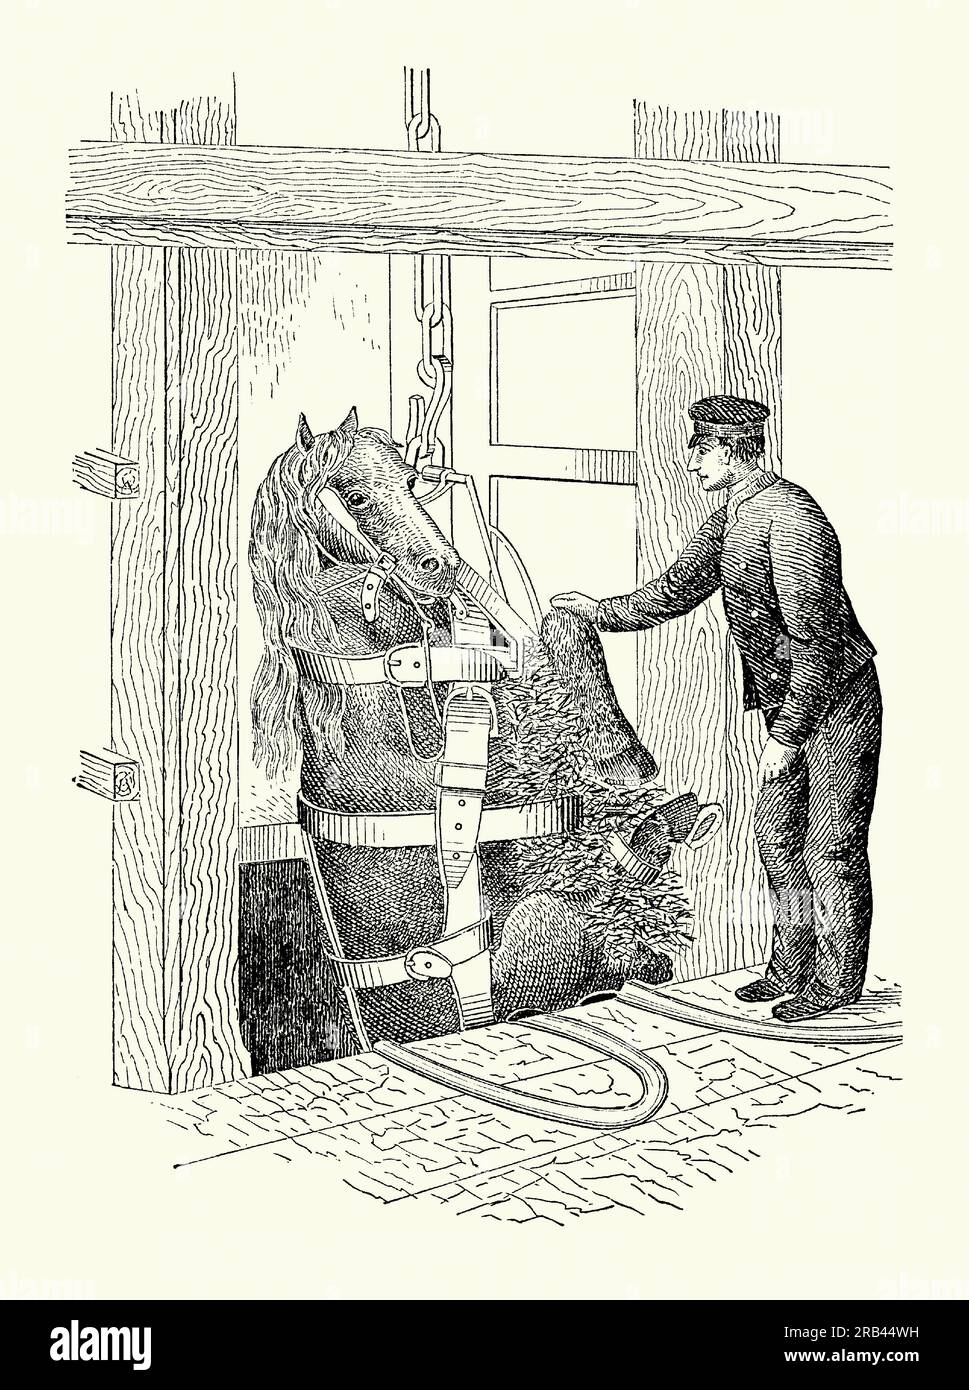 An old engraving from the 1800s of a horse sling. It is from a Victorian mechanical engineering book of the 1880s. A horse sling is a harness device designed to lift and suspend a horse from the ground. Here the horse is being winched up from below and a sling was used in mines for this purpose. Horse slings could be used within ships when transporting the animals. Horse slings are often used for medical purposes to aid horses with leg injuries. Stock Photo